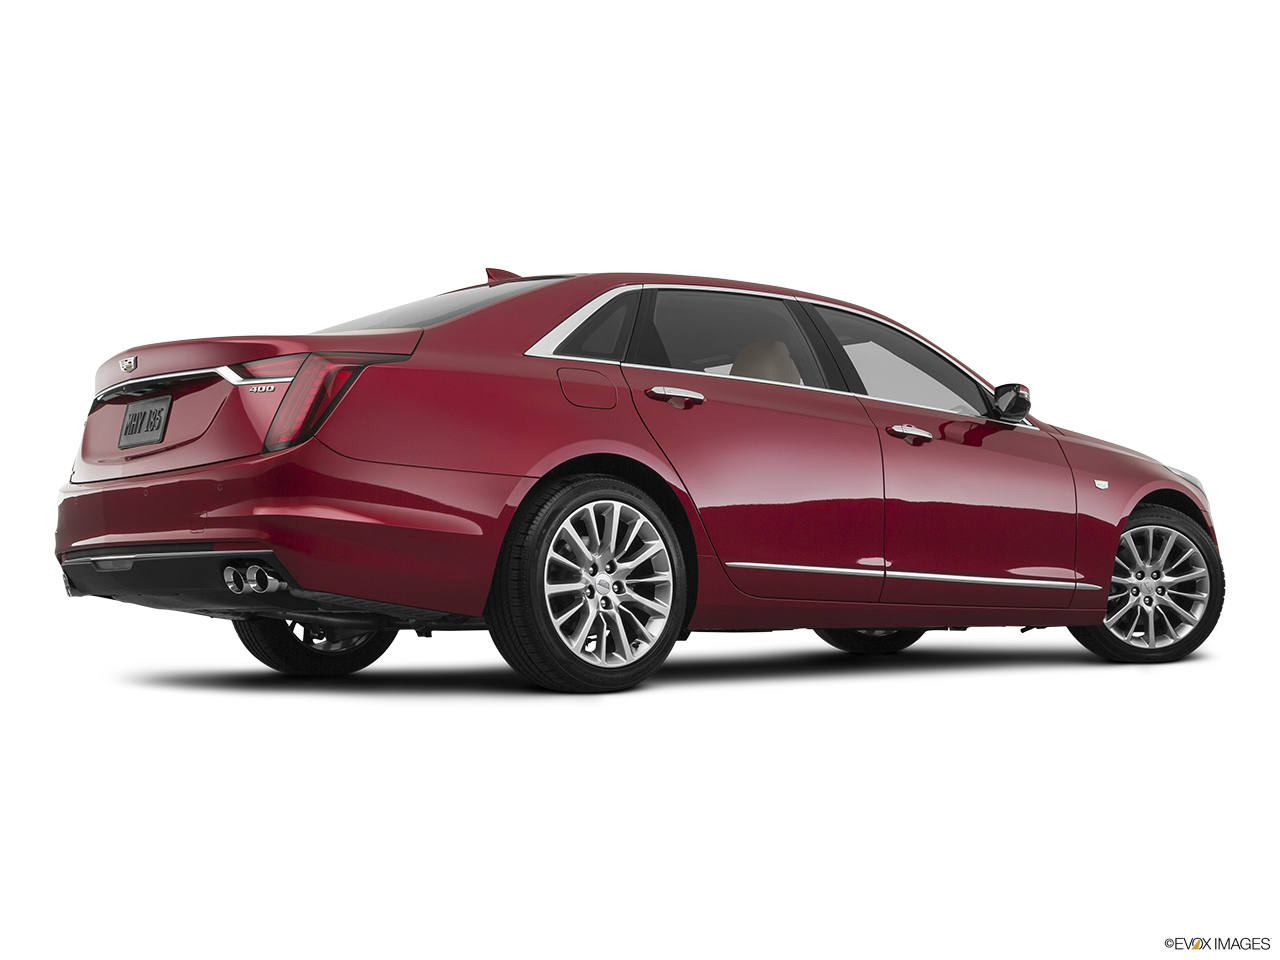 2020 Cadillac CT6 Luxury Low/wide rear 5/8. 